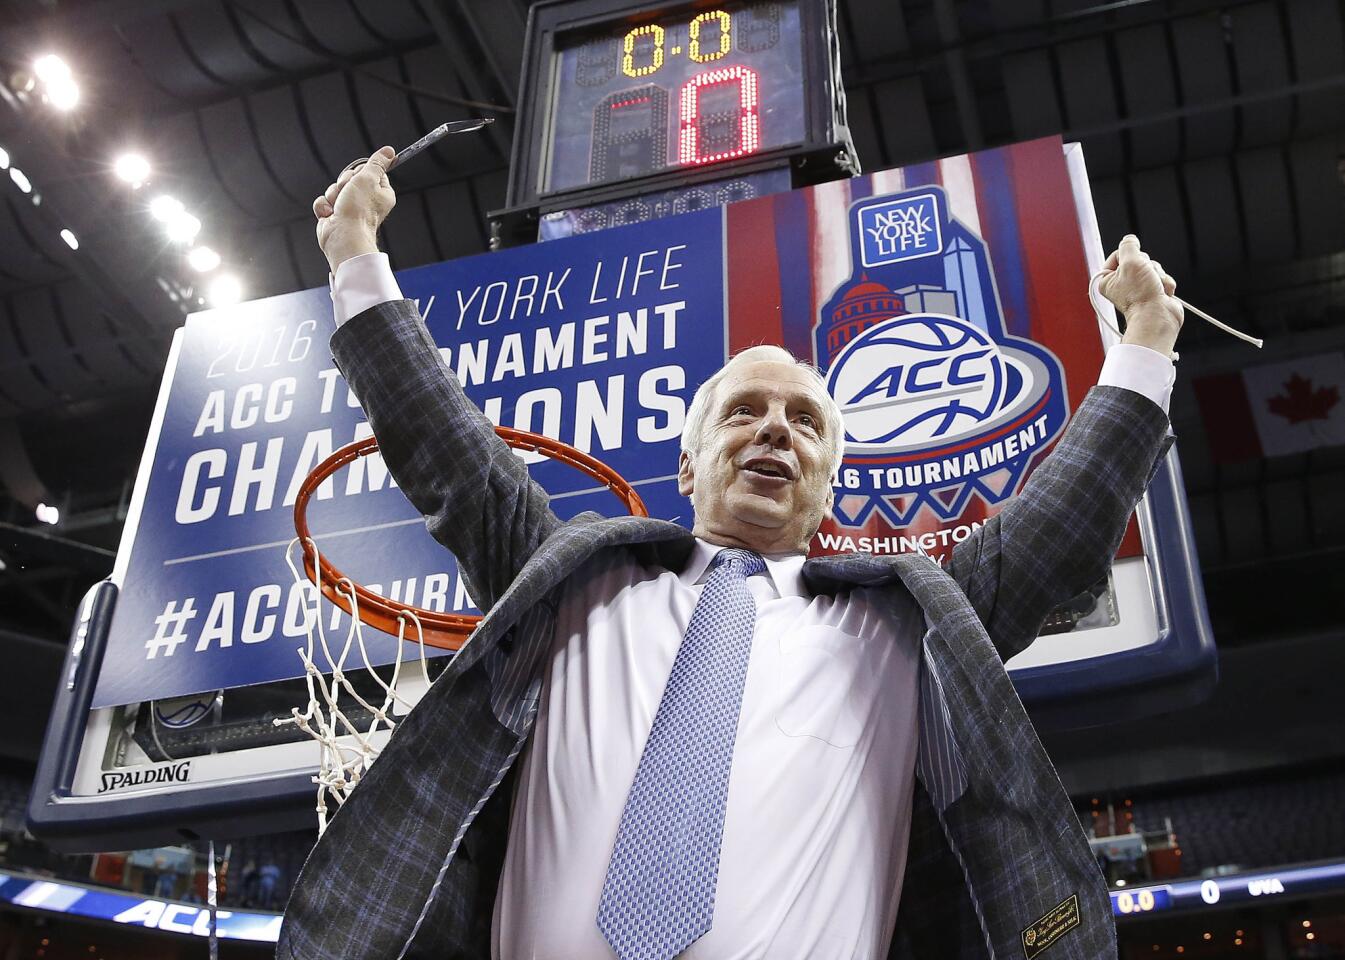 North Carolina Coach Roy Williams holds part of the net after his Tar Heels defeated Virginia in the ACC championship game on March 12.